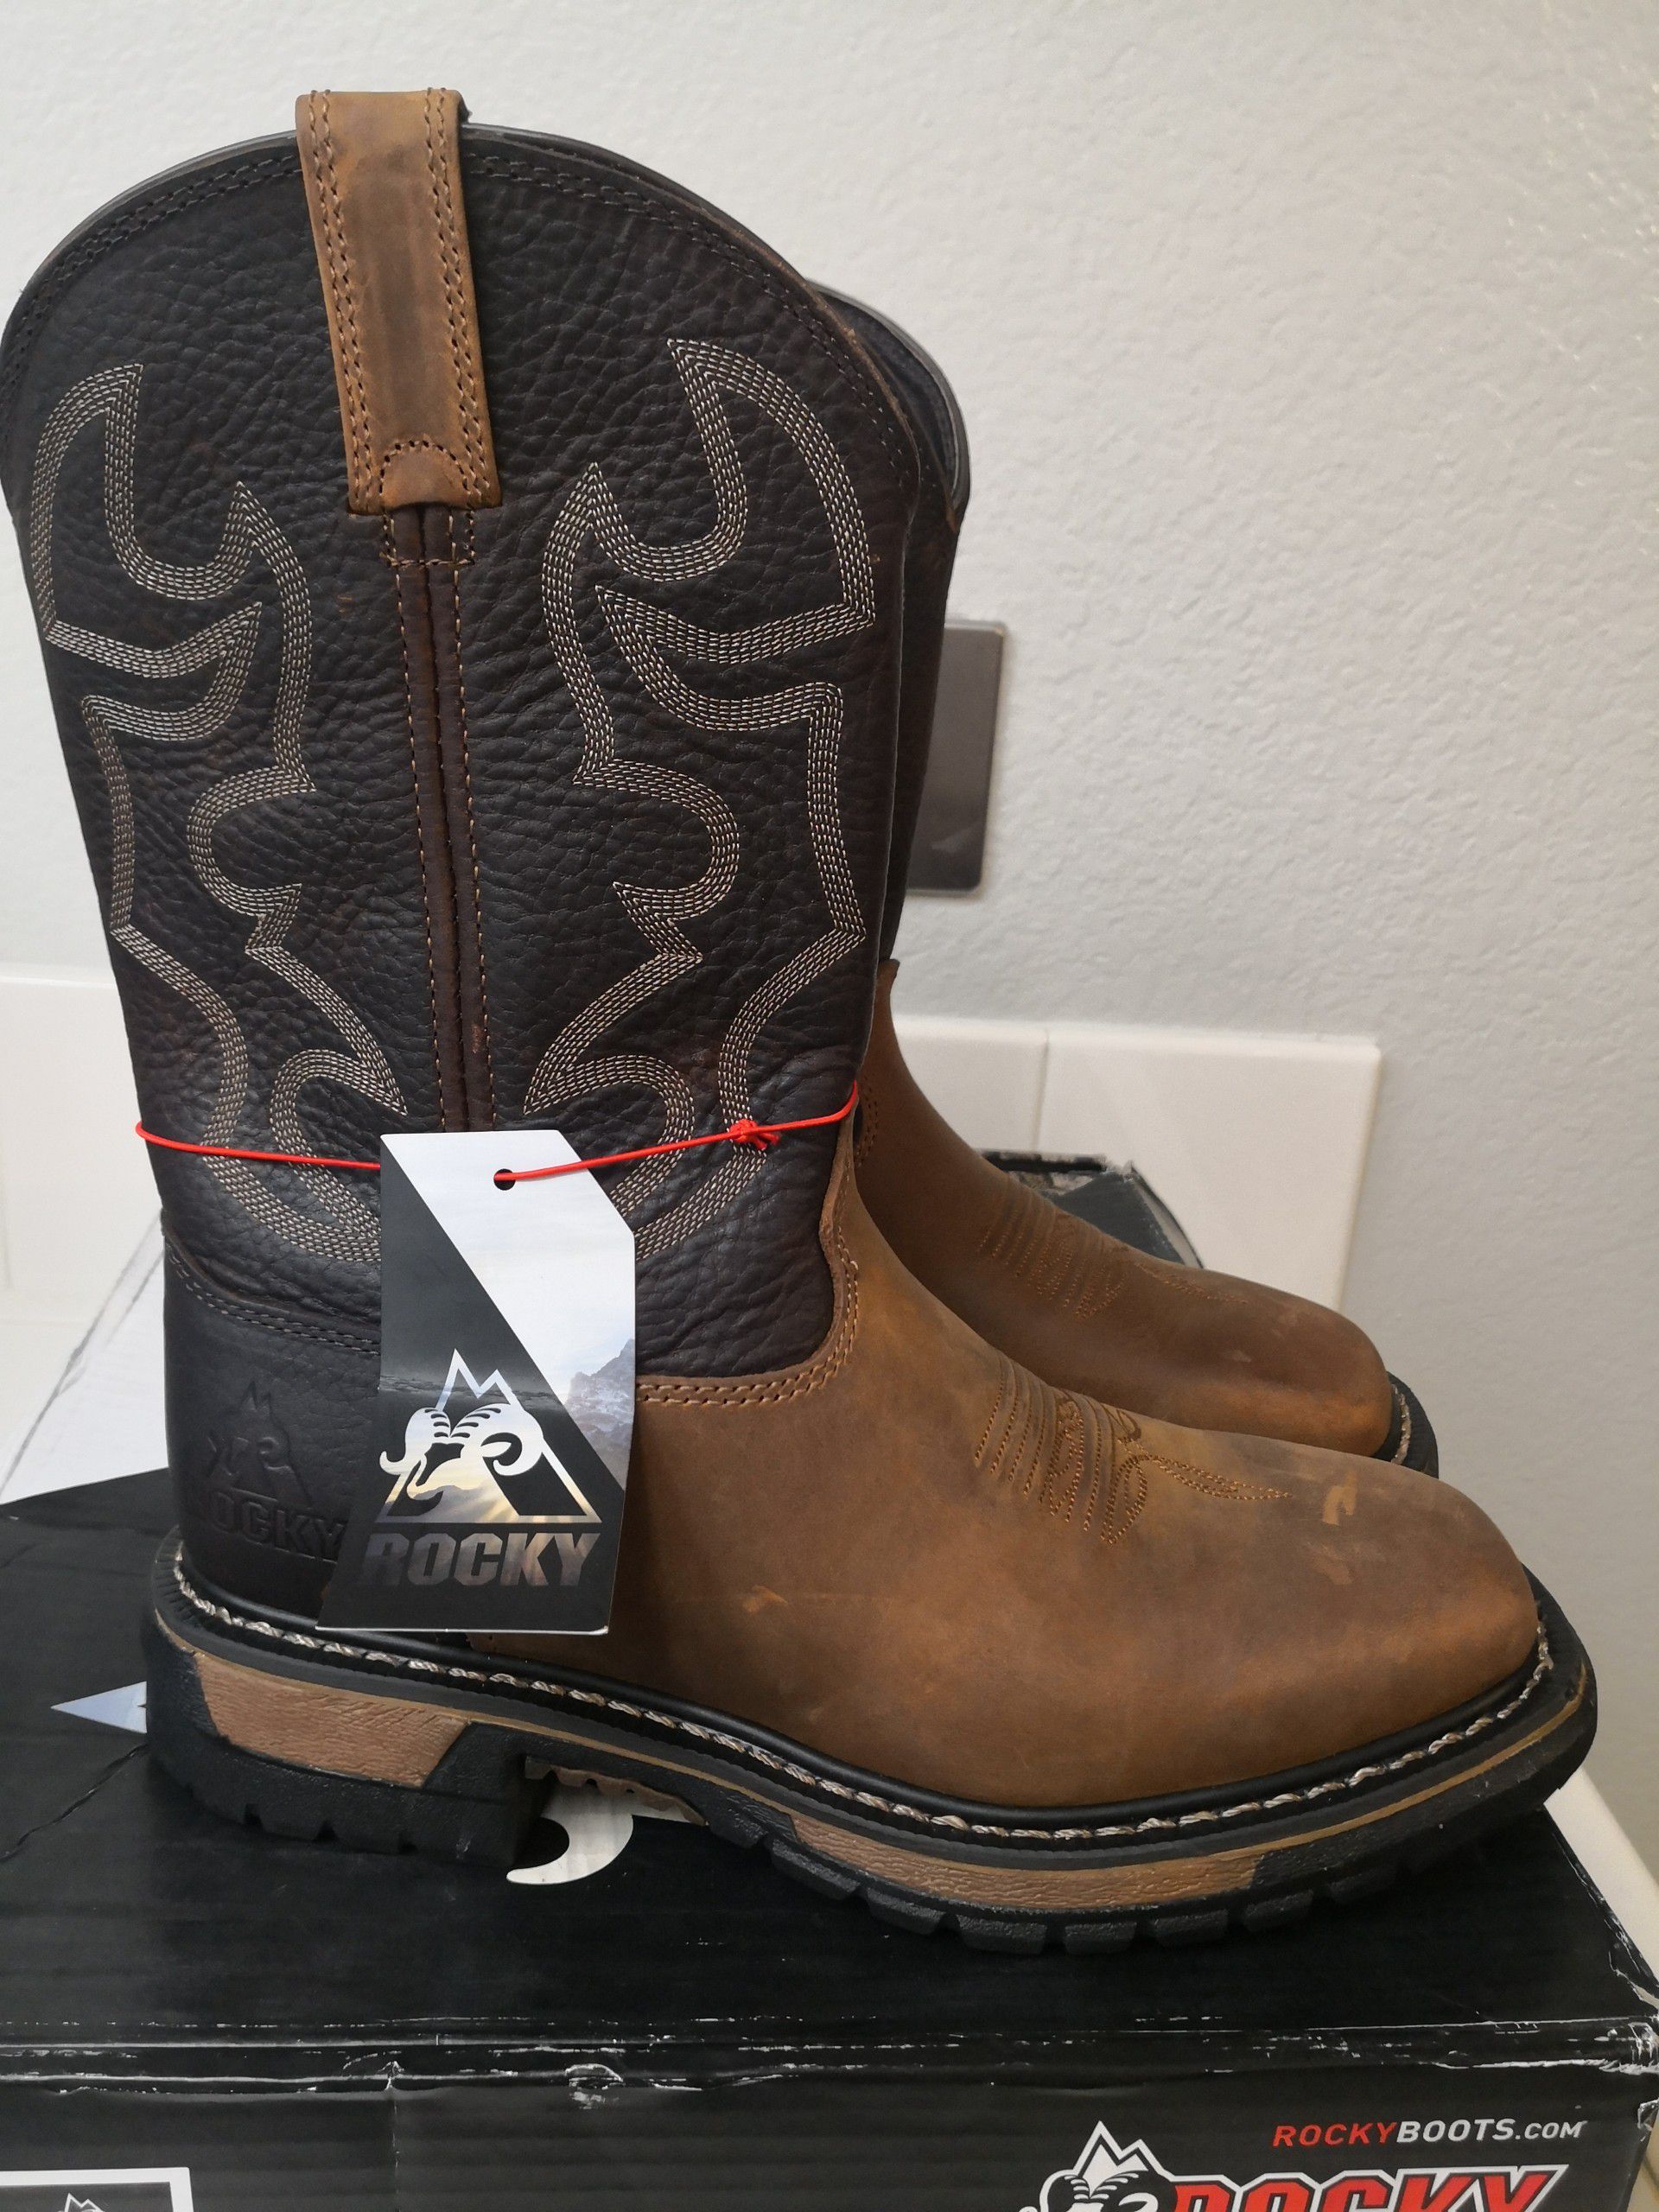 Brand new rocky soft toe work boots size 8.5